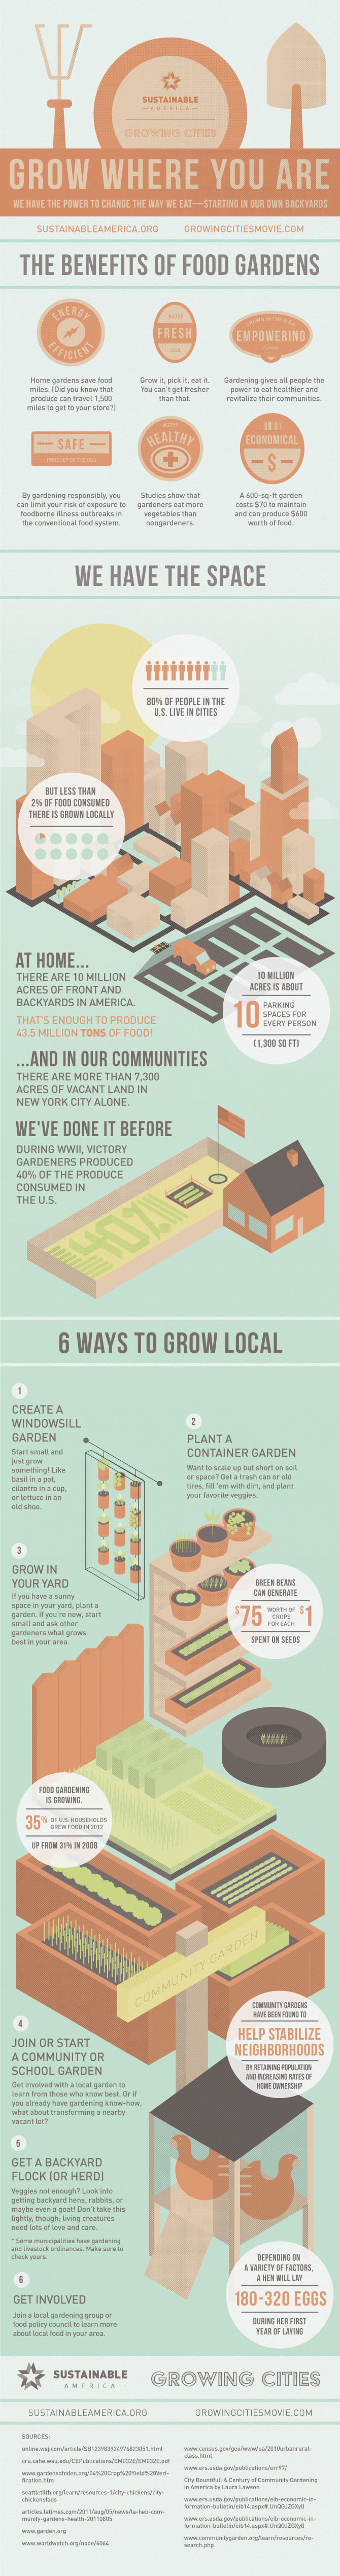 Grow Where You Are Information Graphic